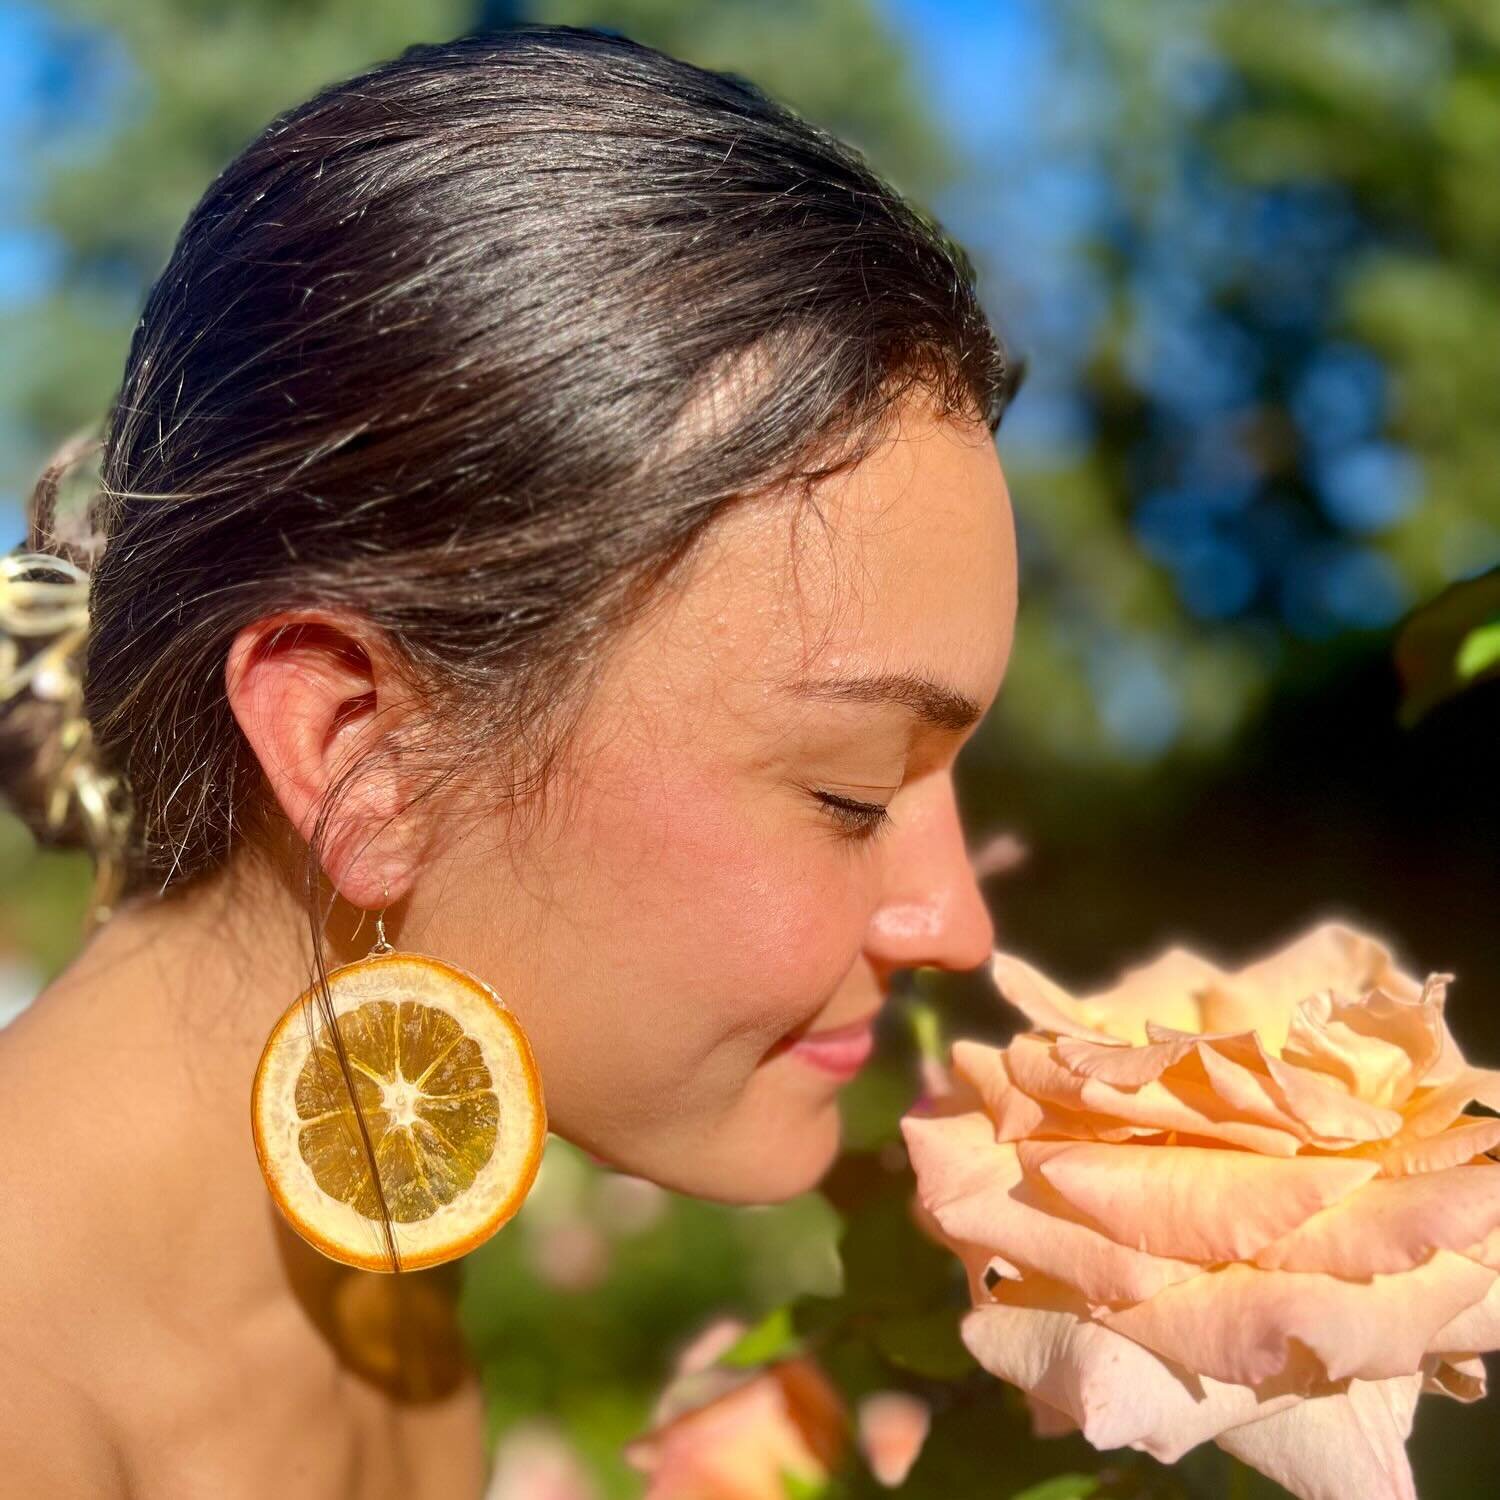 🍊✨ Spring vibes are in full swing! 🌸🌿 All my real fruit jewelry is back, featured here is one of my favorite pieces, my real pressed Orange slices modeled by the gorgeous @megumi.steward 🌼 Check out the link in my bio for the whole fruit collecti